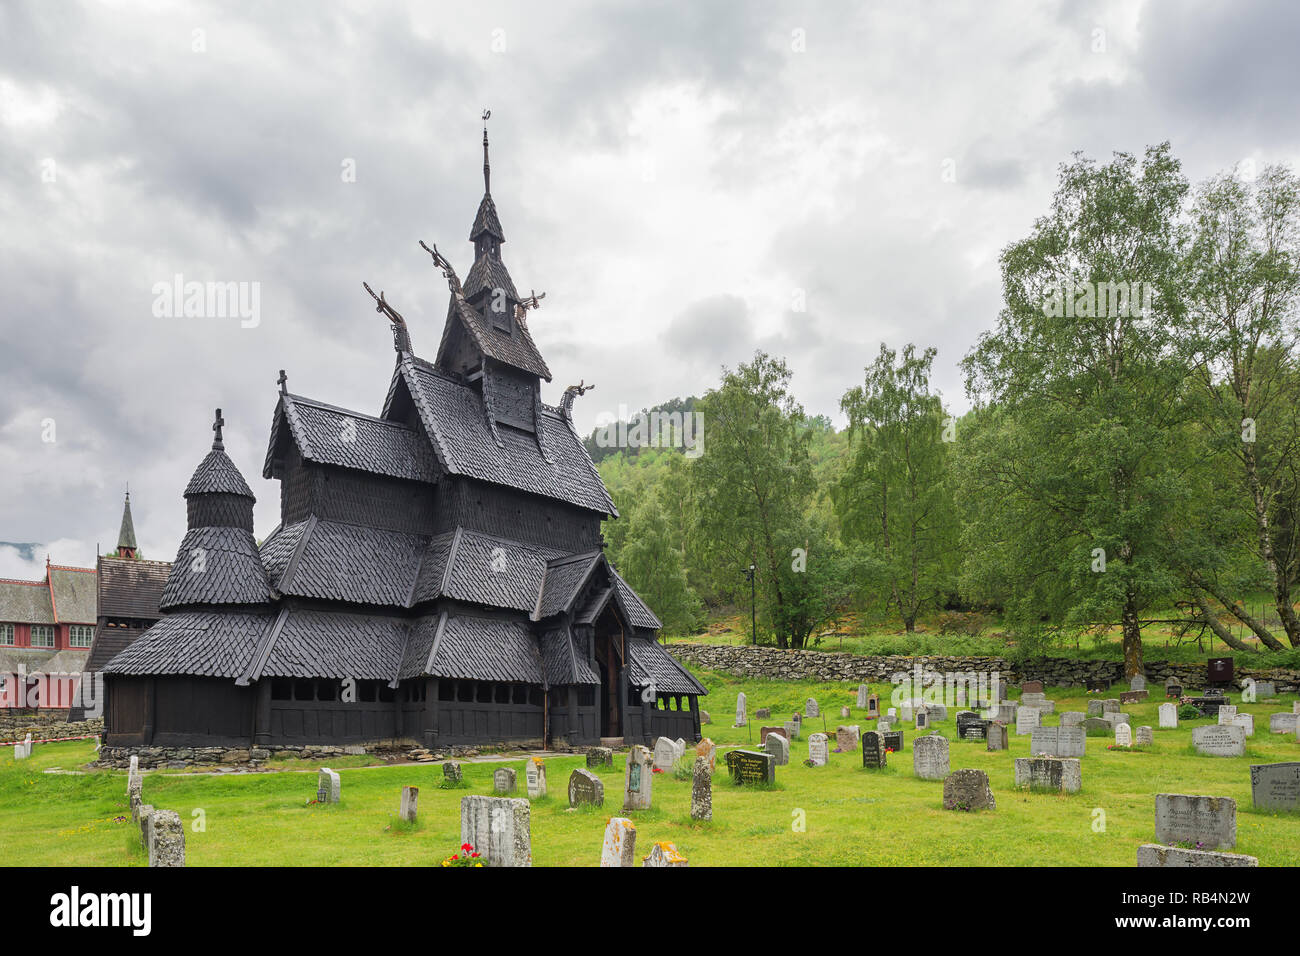 Editorial: LAERDAL, SOGN OG FJORDANE, NORWAY, June 11, 2018 - The Borgund stave church seen from the cemetery with part of the Borgund church in the b Stock Photo